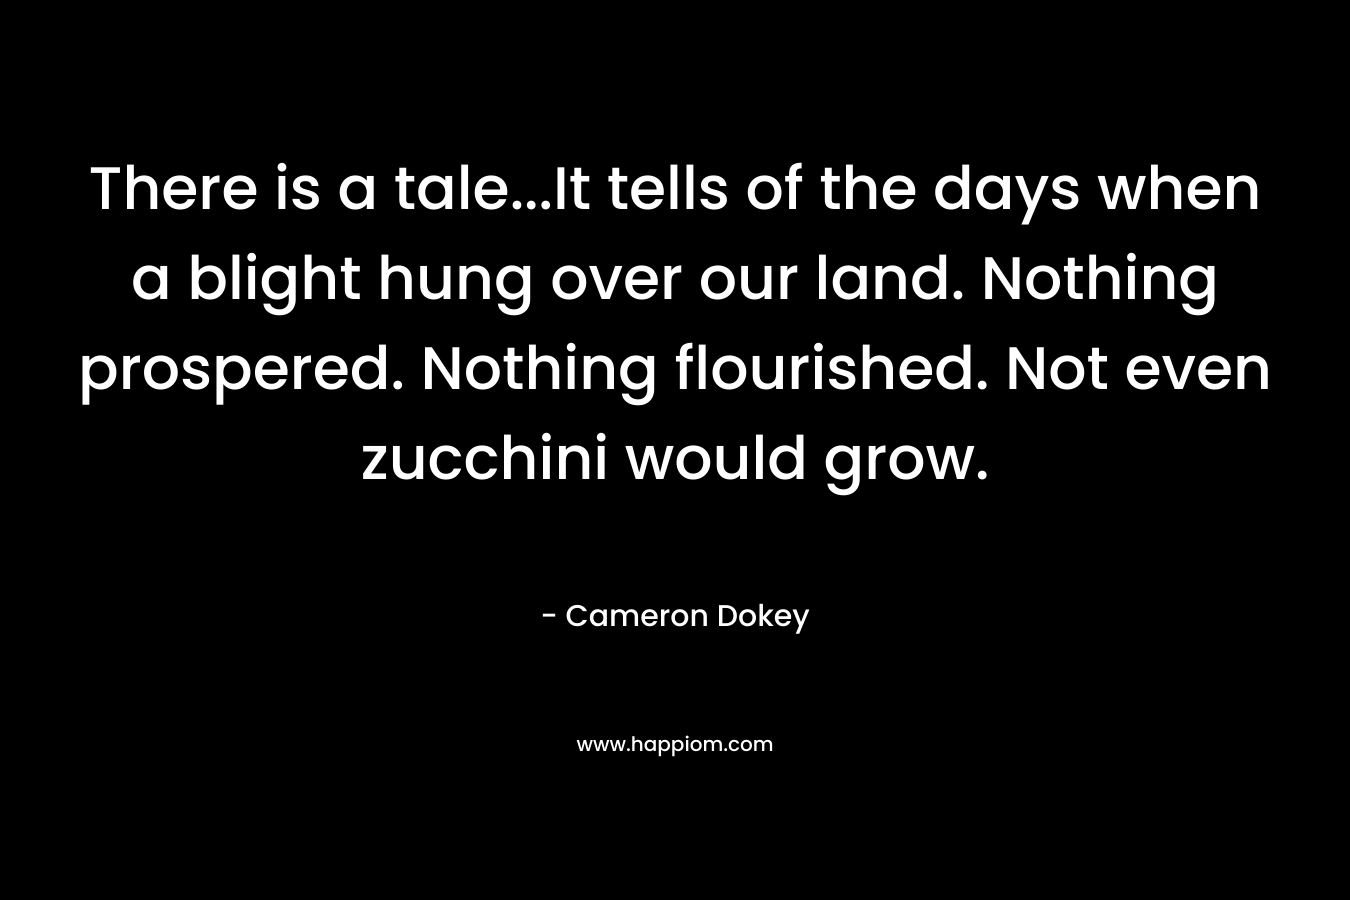 There is a tale…It tells of the days when a blight hung over our land. Nothing prospered. Nothing flourished. Not even zucchini would grow. – Cameron Dokey